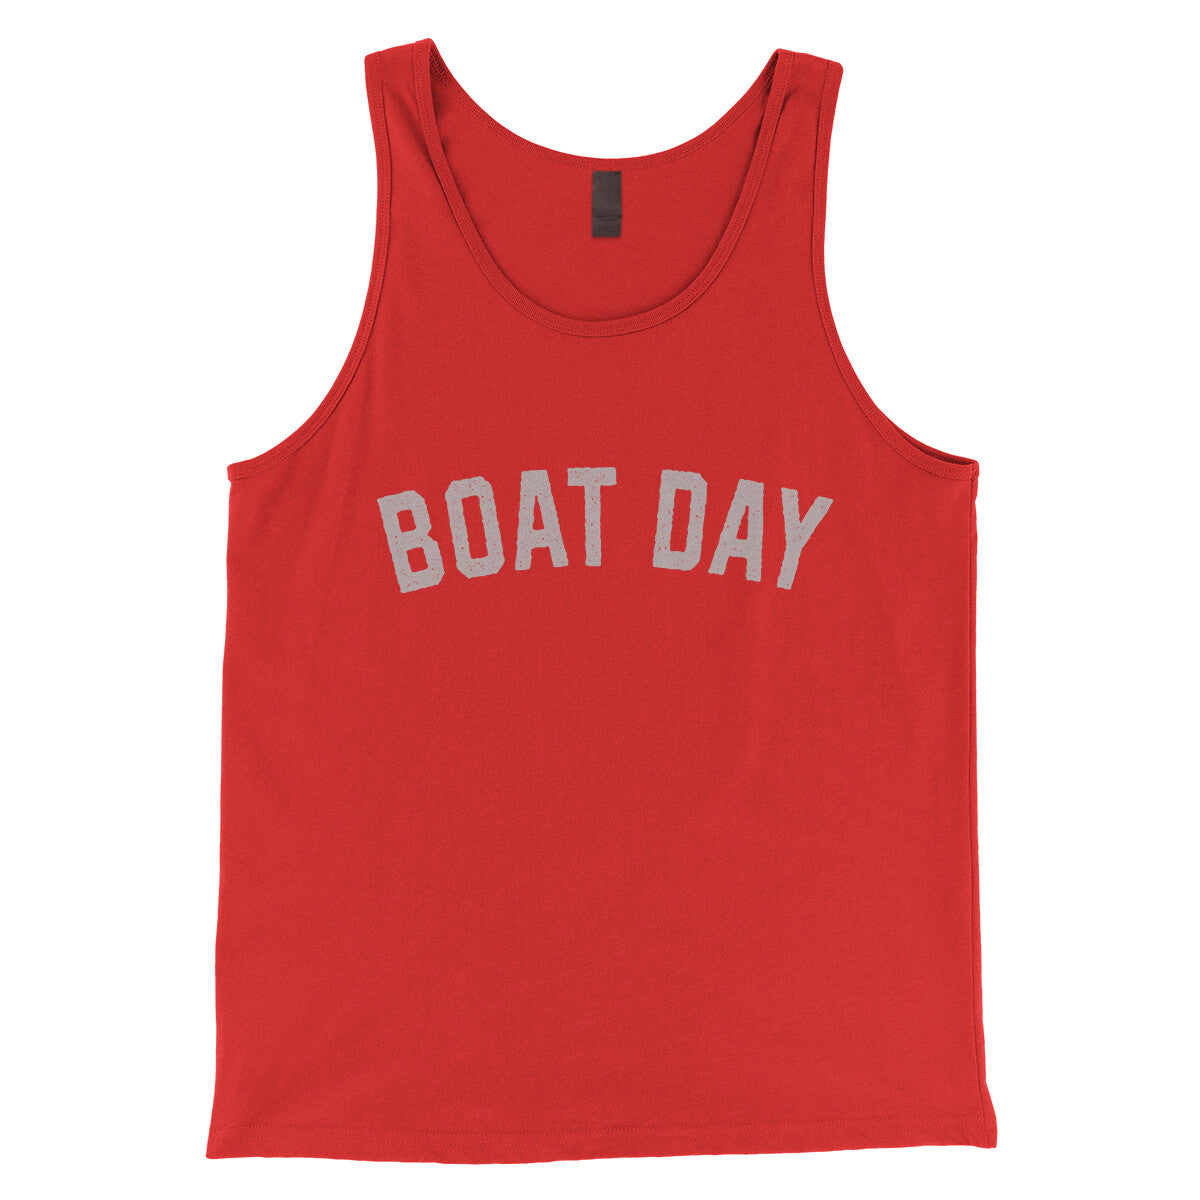 Boat Day in Red Color